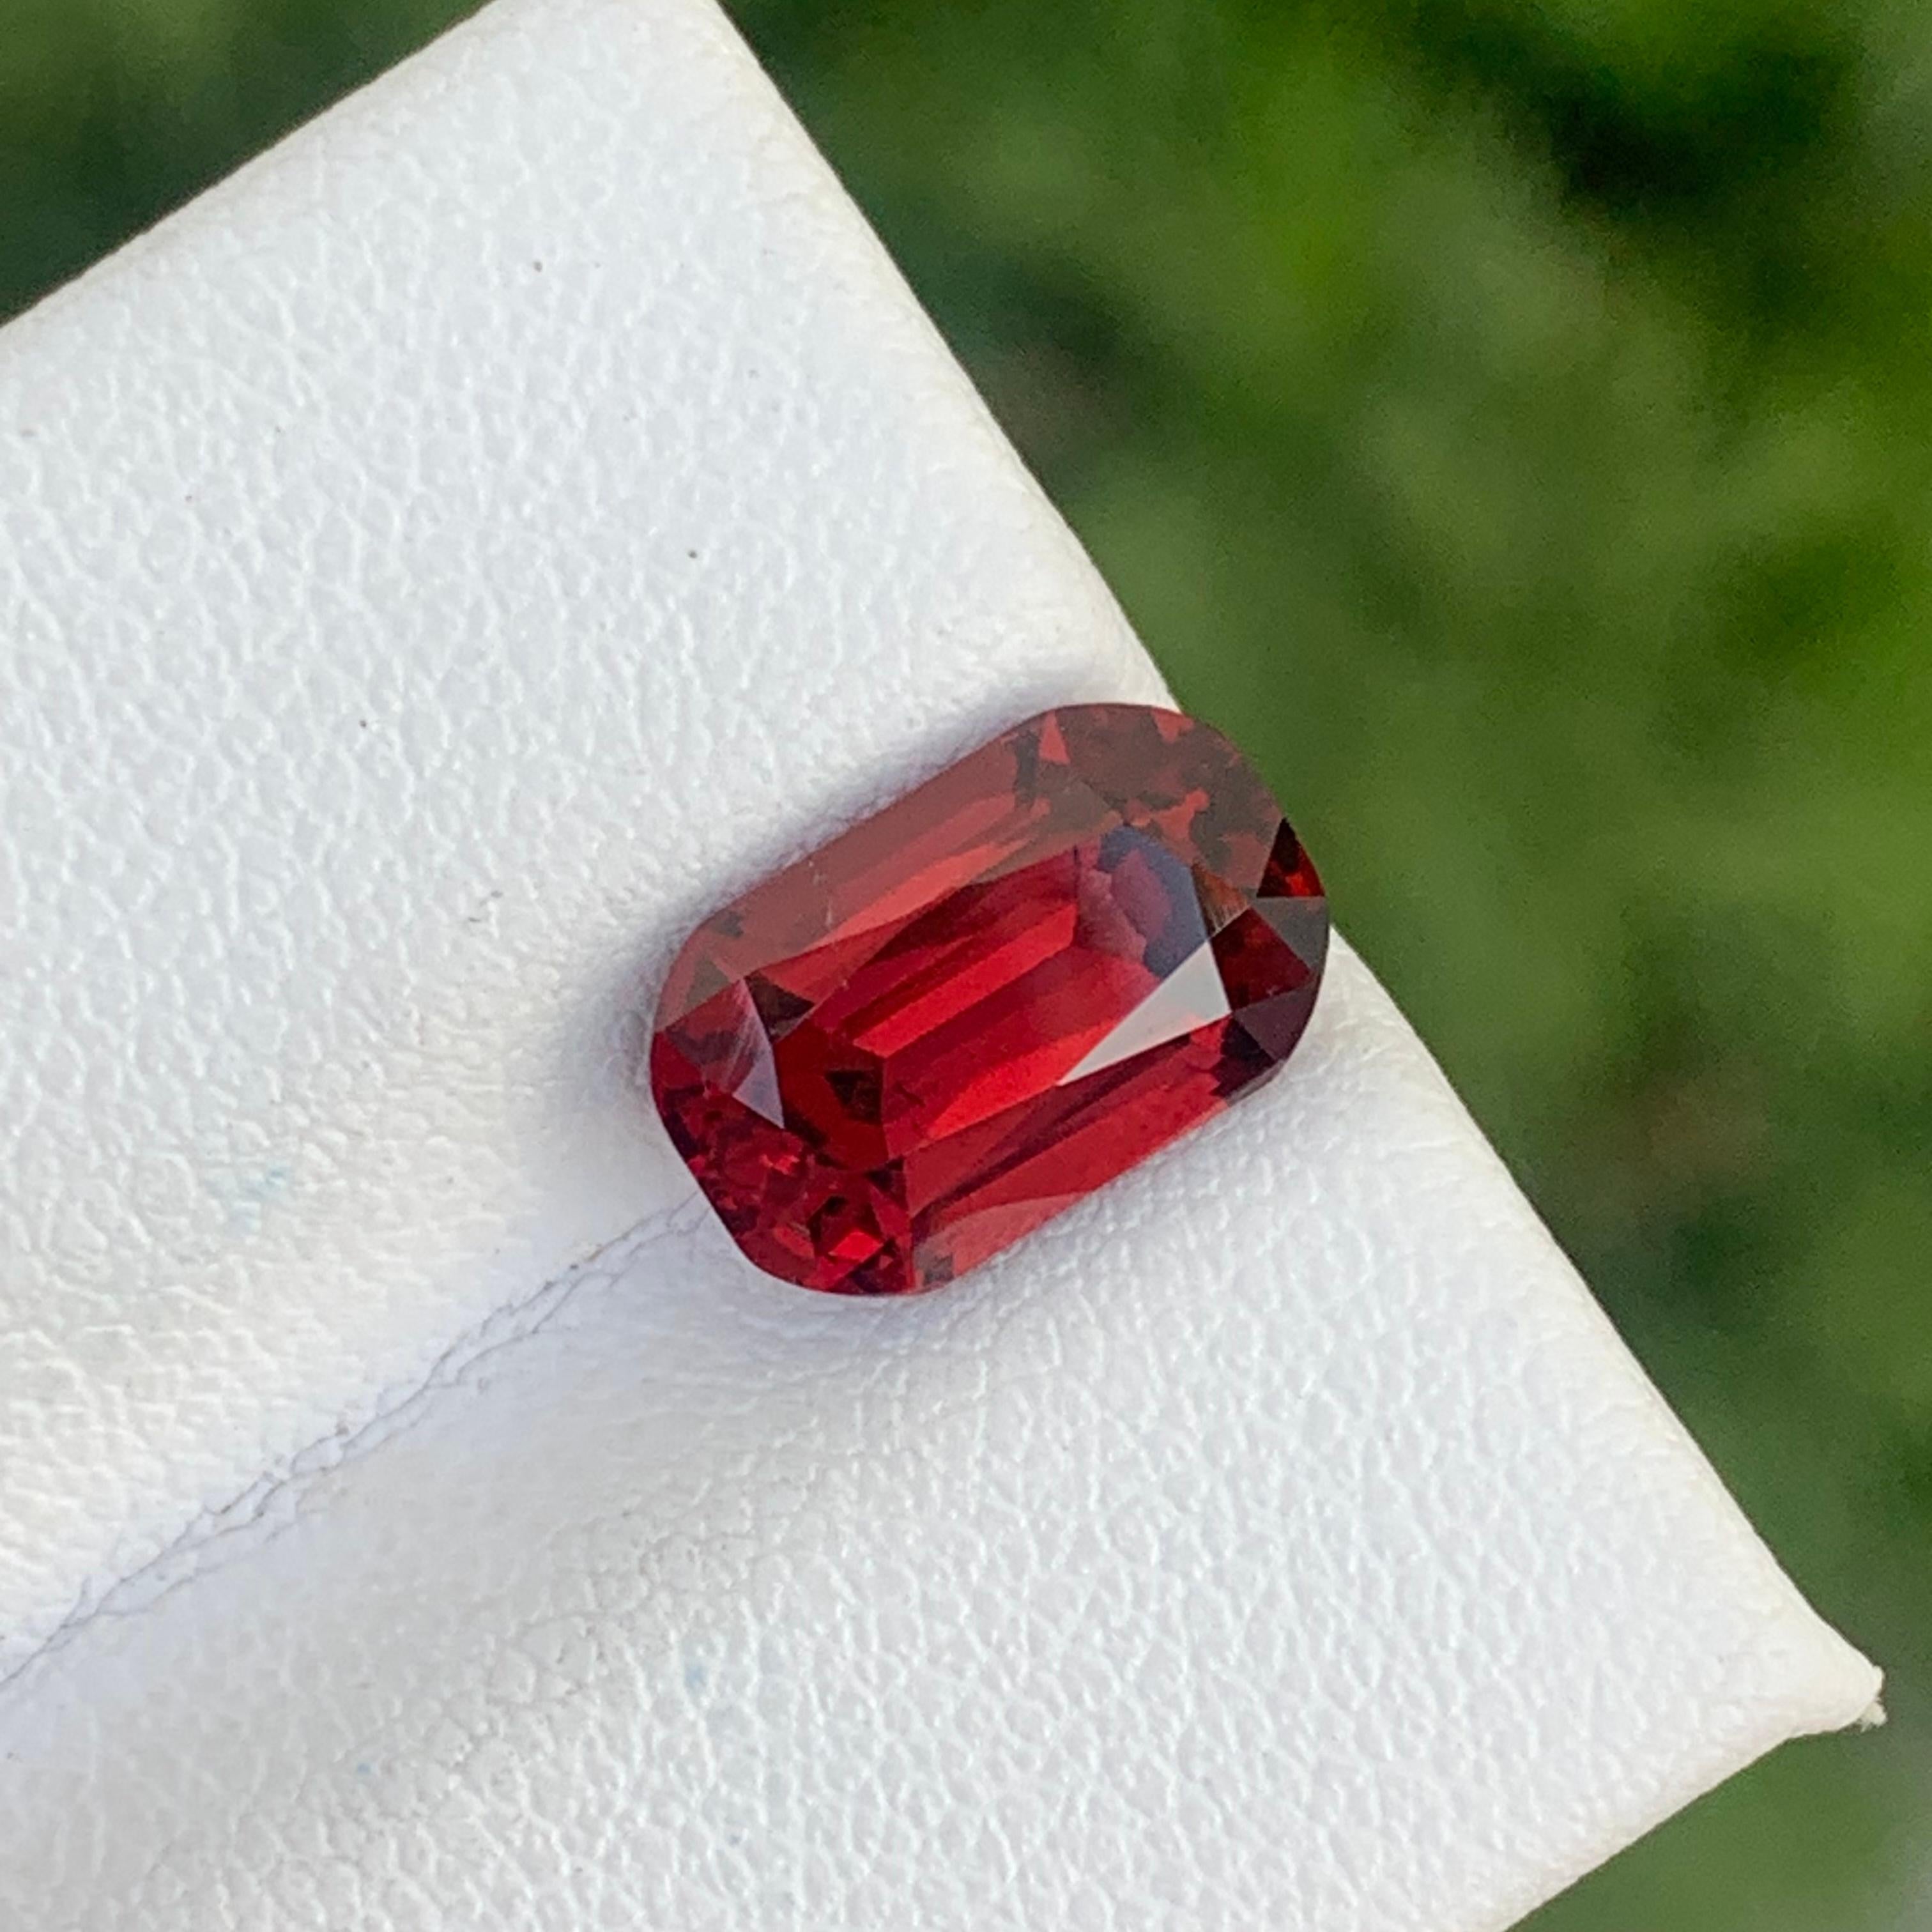 Loose Rhodolite Garnet
Weight : 3.70 Carats
Dimensions : 10.7x6.8x5.4 Mm
Origin : Tanzania Africa
Clarity : AAA 
Shape: Oval
Cut: Cushion
Certificate: On Demand
Treatment: Non
Color: Red
Rhodolite is a mixture of pyrope and almandite garnets. The